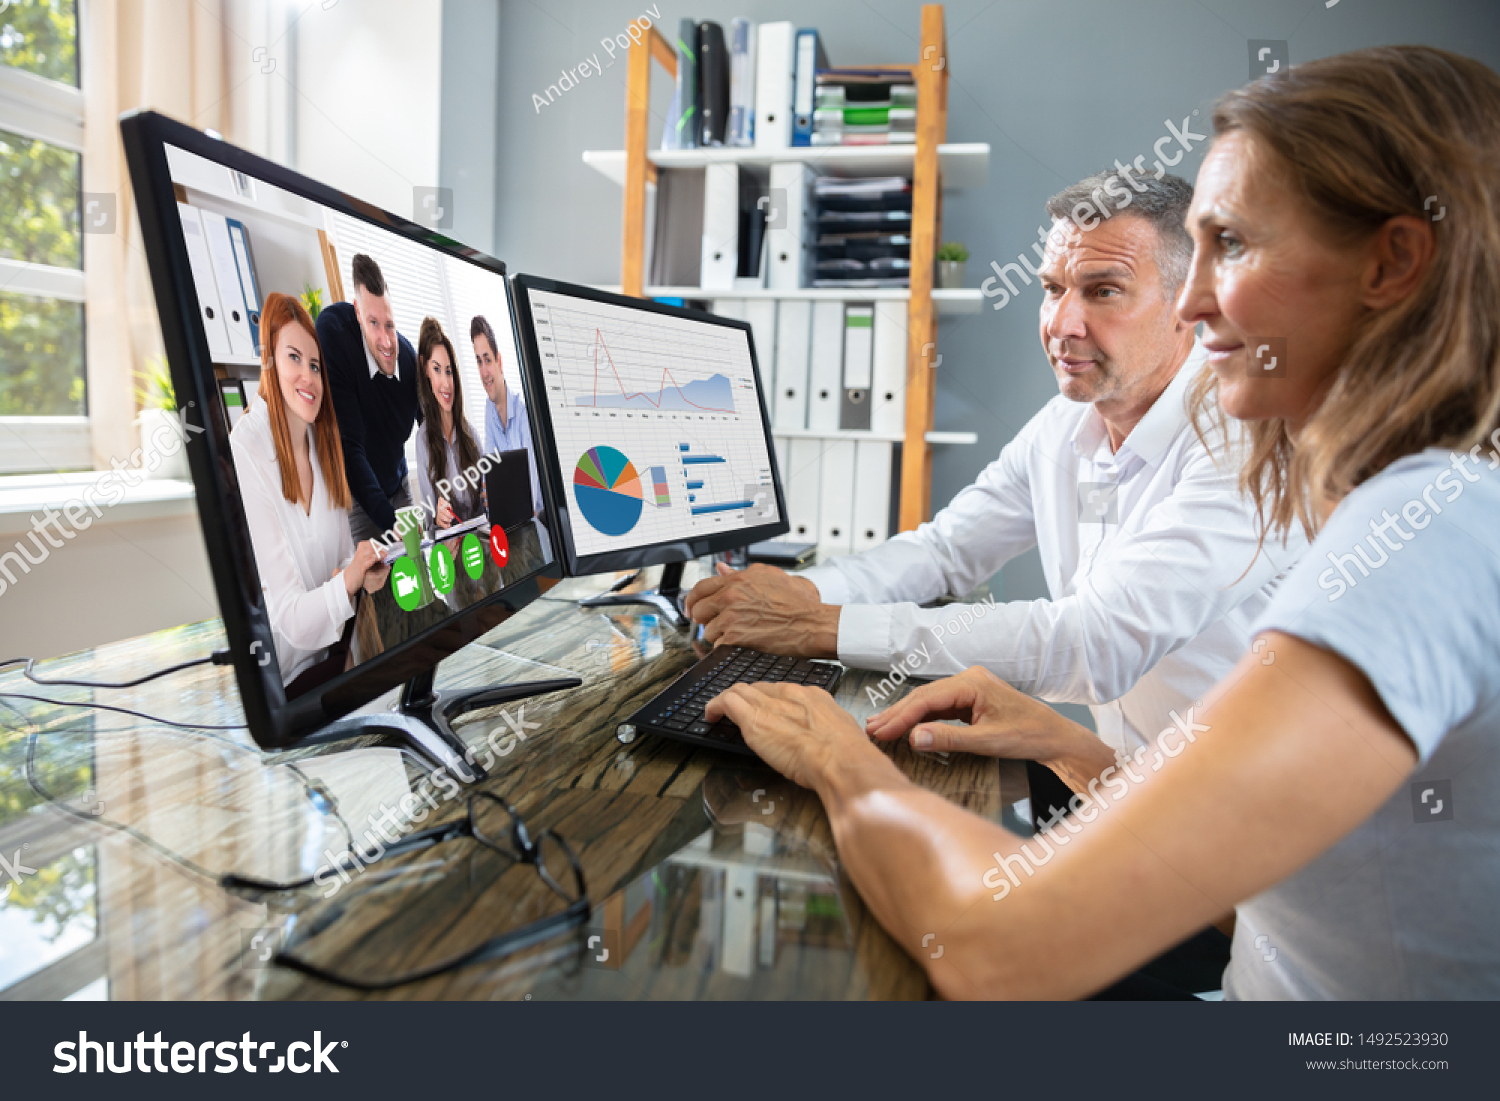 Mature Businessman Video Conferencing With His Colleague On Computer #1492523930